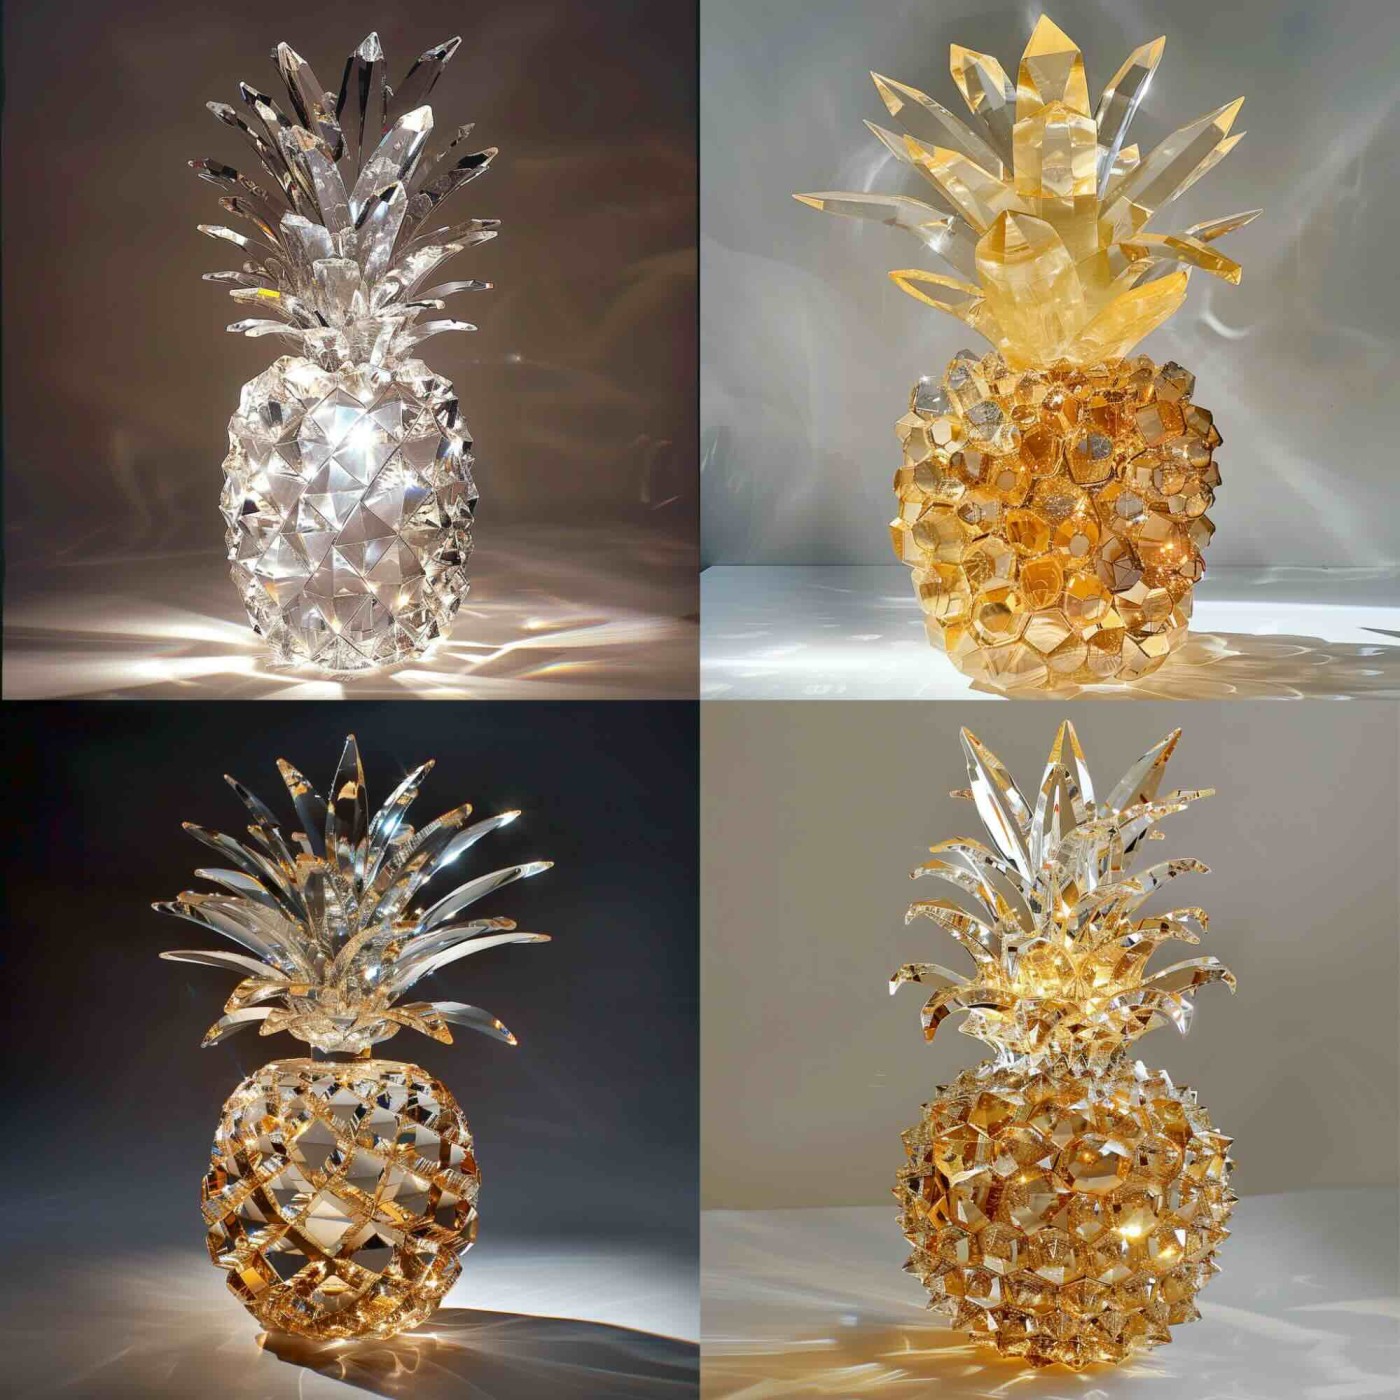 A pineapple made of crystals